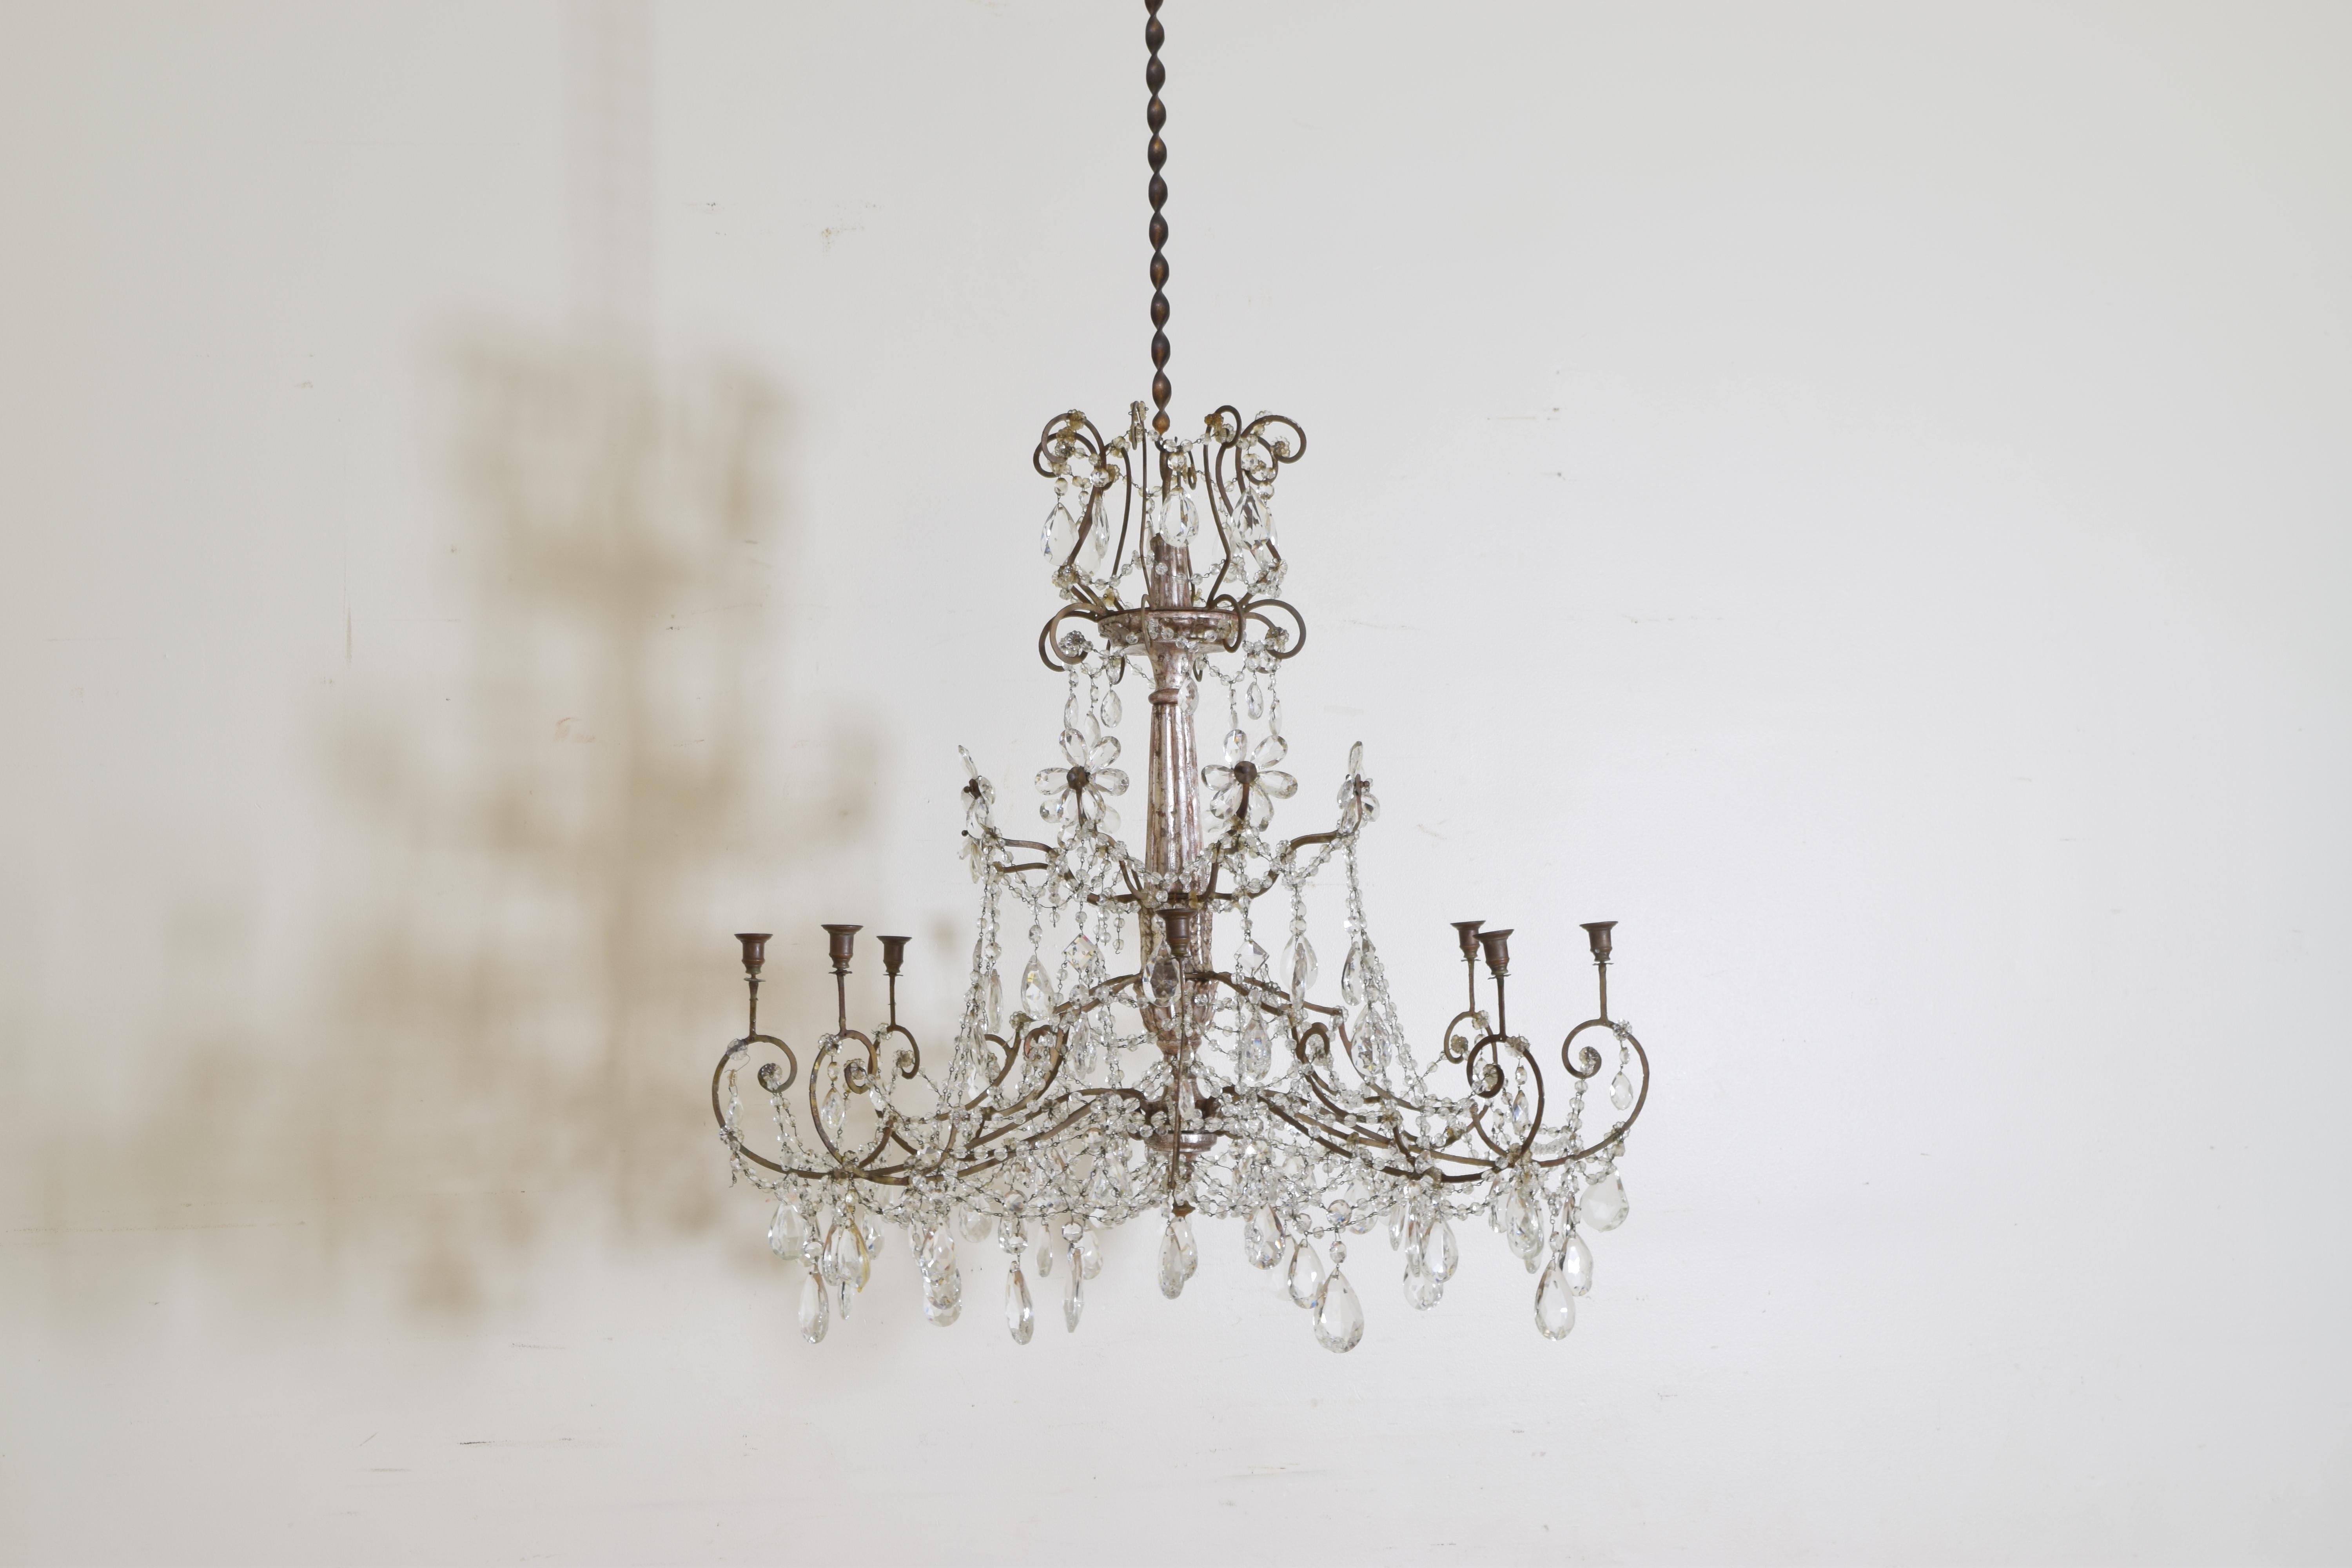 Neoclassical Italian Neoclassic Silver Gilt, Iron, and Glass 8-Light Chandelier